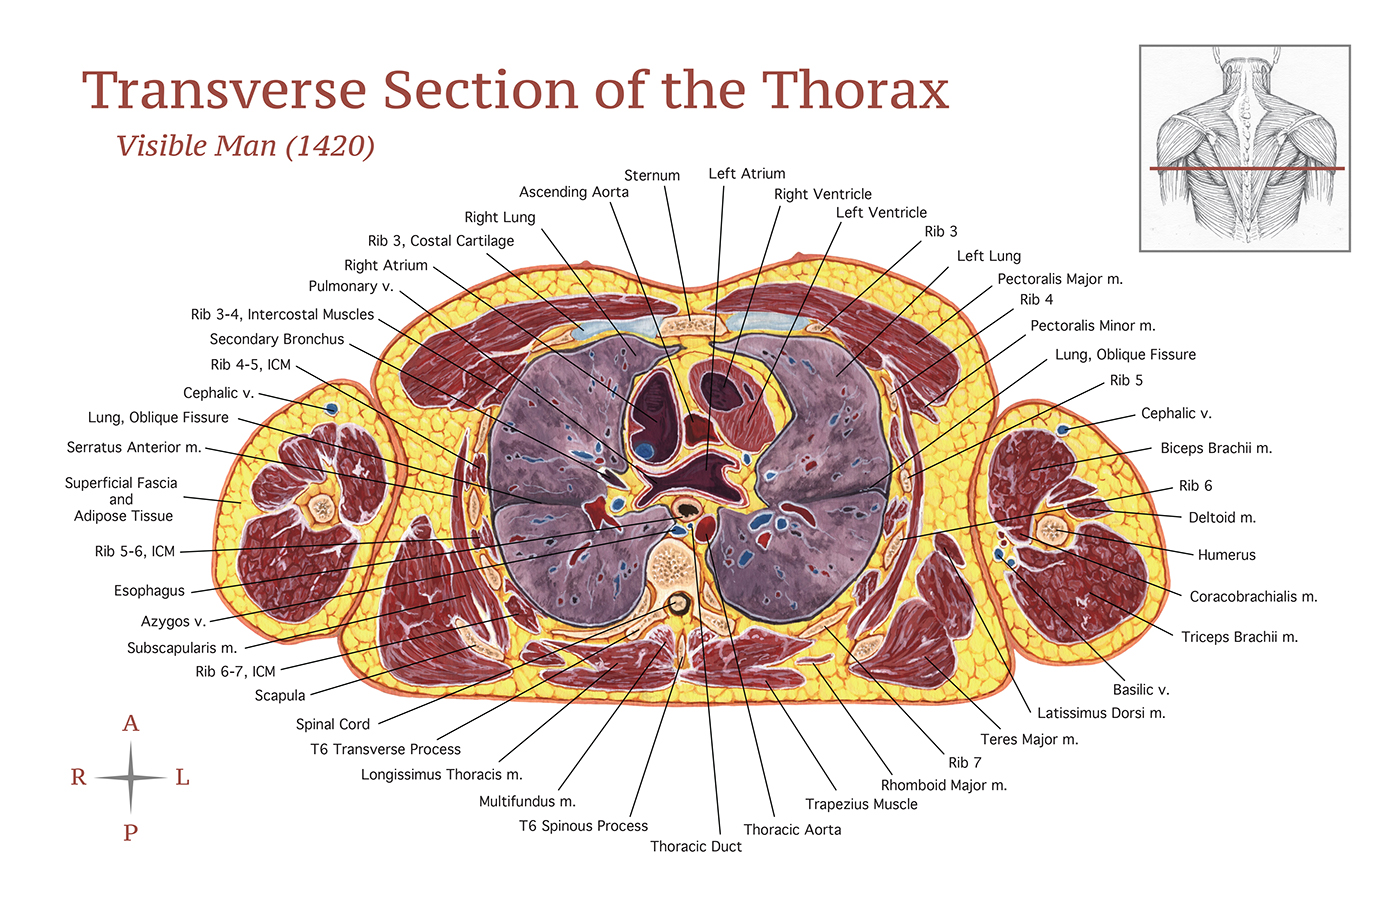 Transverse Section of the Thorax on Behance